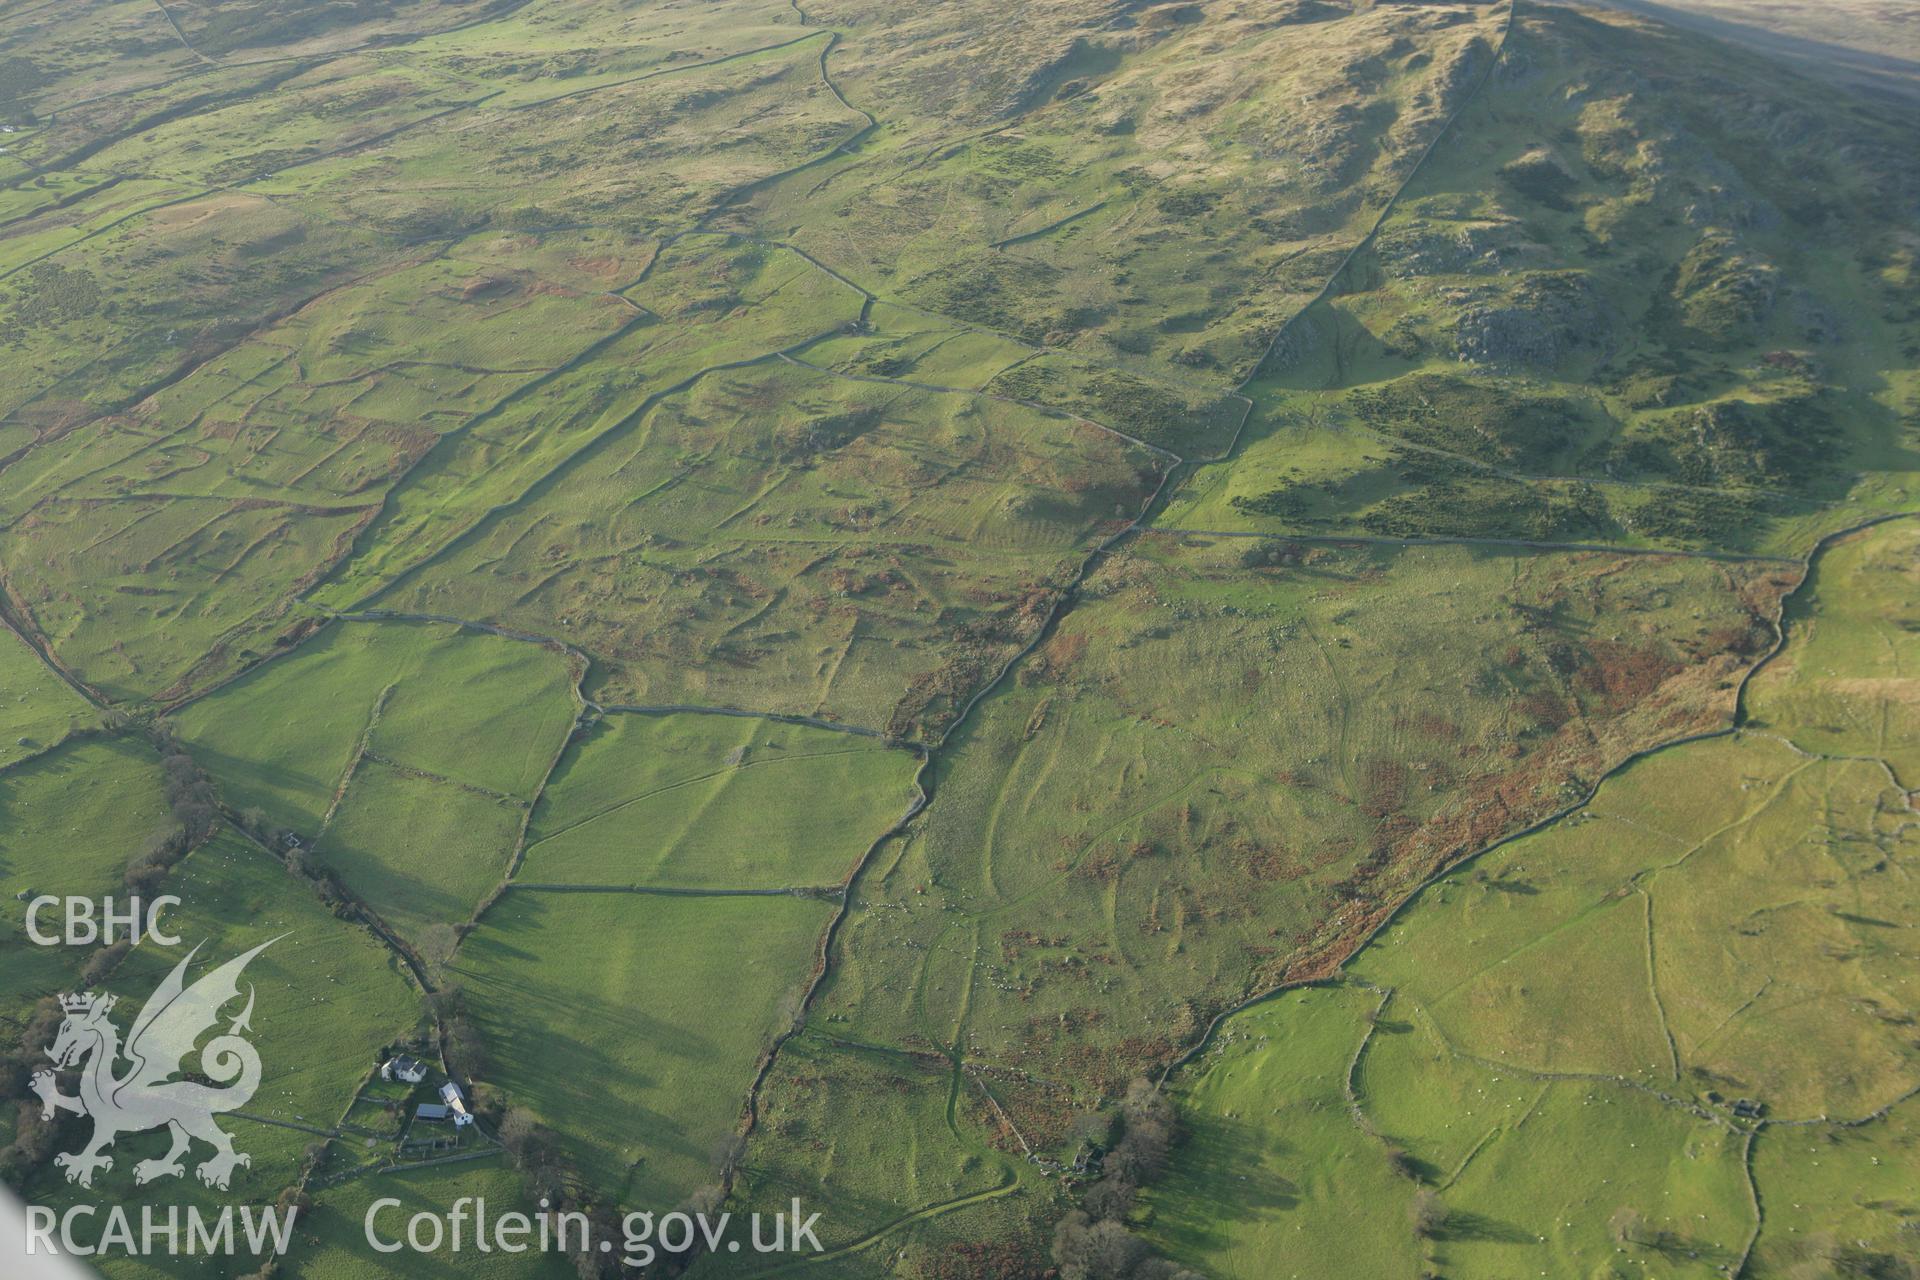 RCAHMW colour oblique aerial photograph of Maen-y-Bardd Settlement and field systems Taken on 10 December 2009 by Toby Driver